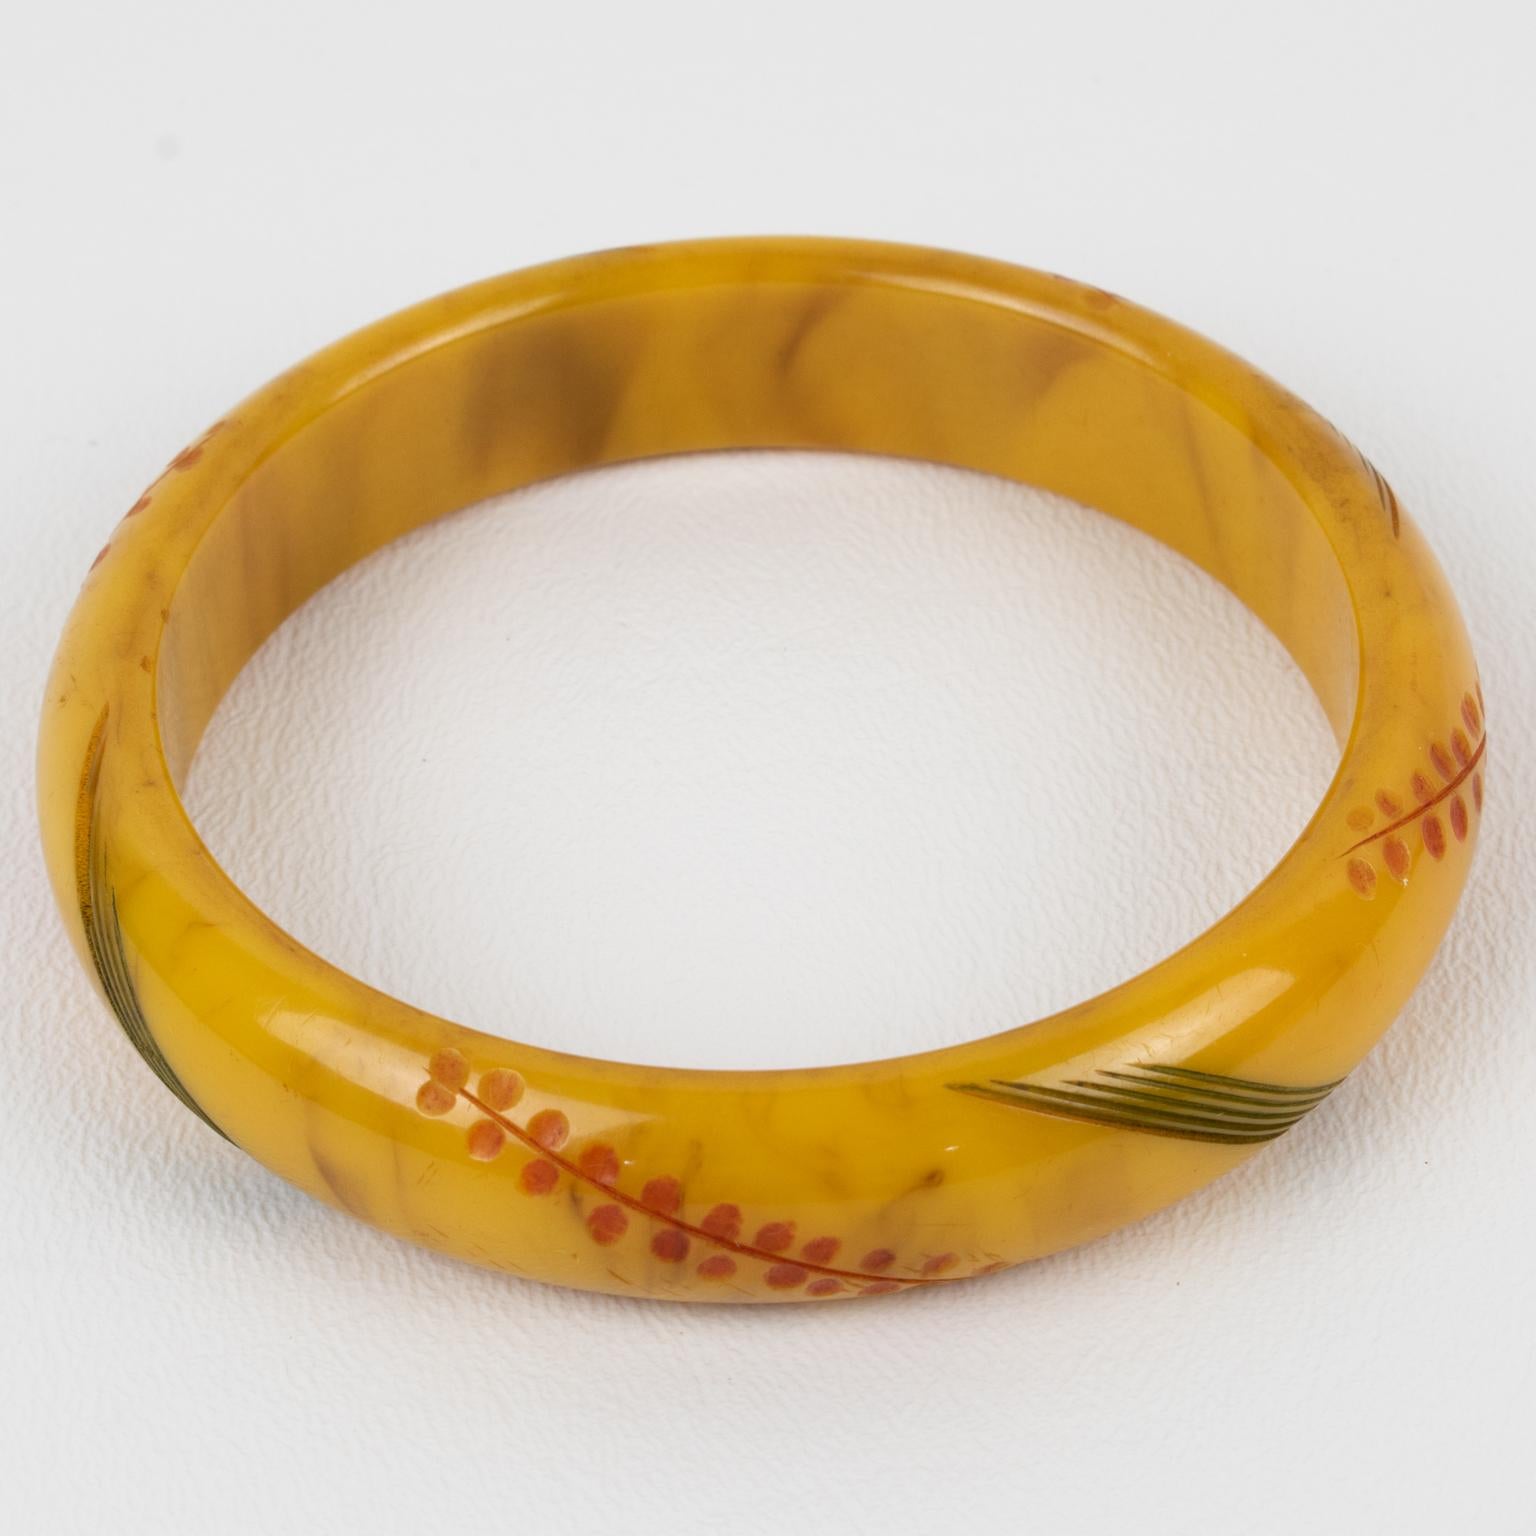 Elegant Bakelite bracelet bangle. Chunky domed shape with stylized floral and geometric carving, all around, and contrasting colors. The bangle color has an intense yellow banana color with toffee brown swirling (also called banana brown.) The